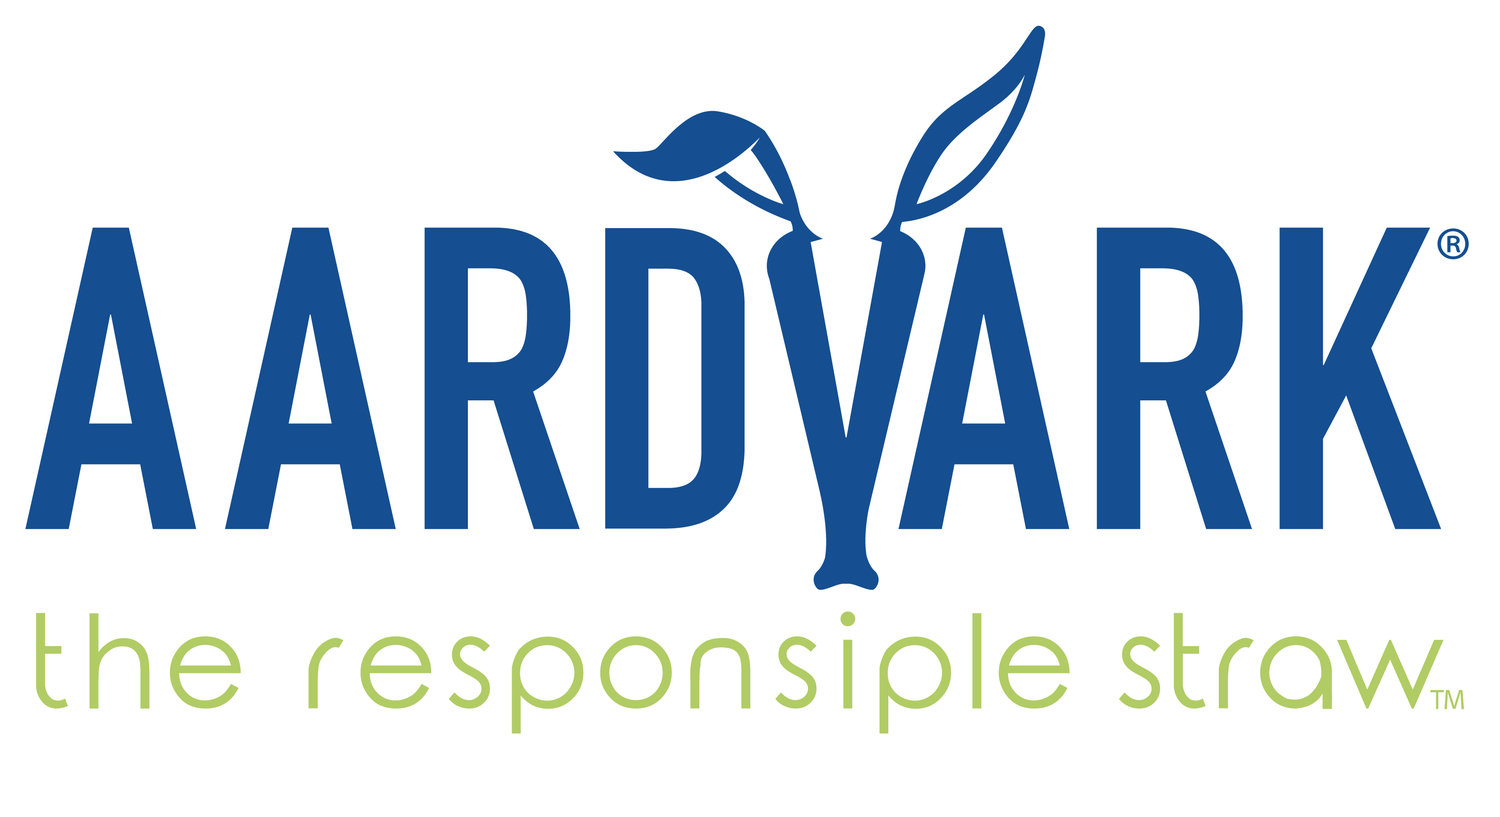 AardvarkÂ® Straws - Made in the USA - Biodegradable - Compostable